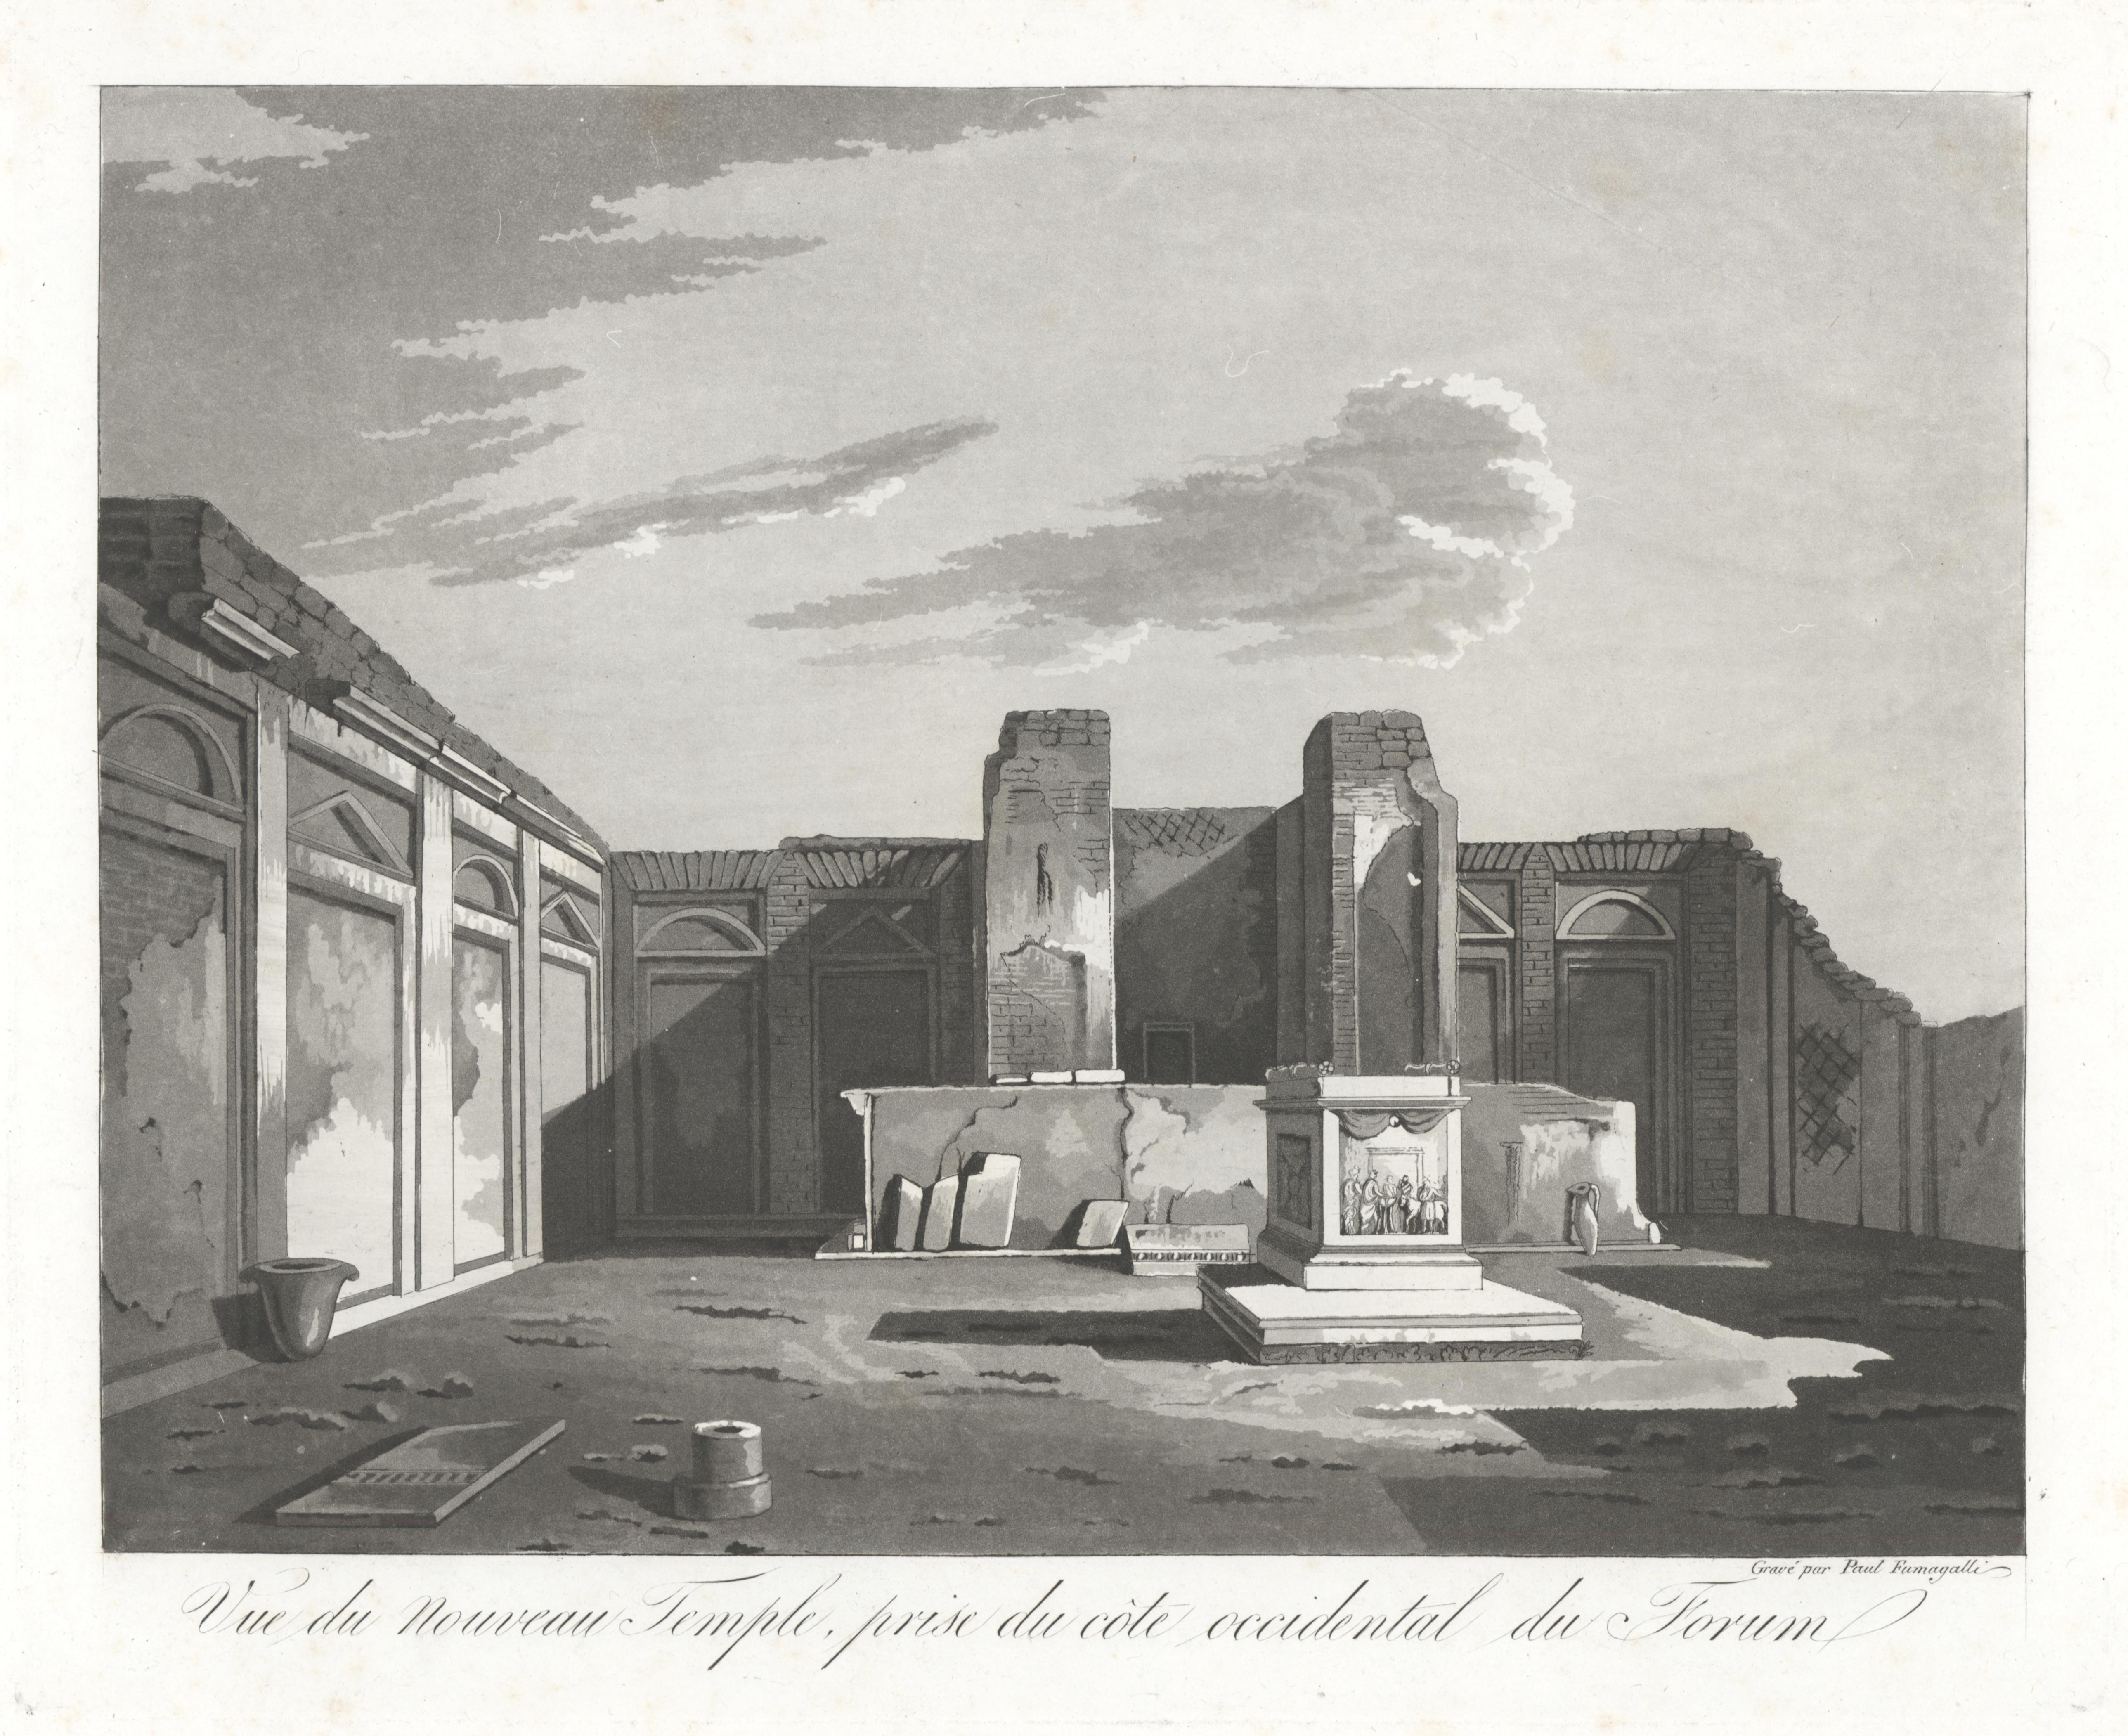 Produced between 1824 -1827, this group of aquatint engravings offer an impressive display of maps, archaeological items and mosaics alongside views and striking glimpses of Pompeii's city and ruins. Paolo Fumagalli (1797-1873), the printmaker,